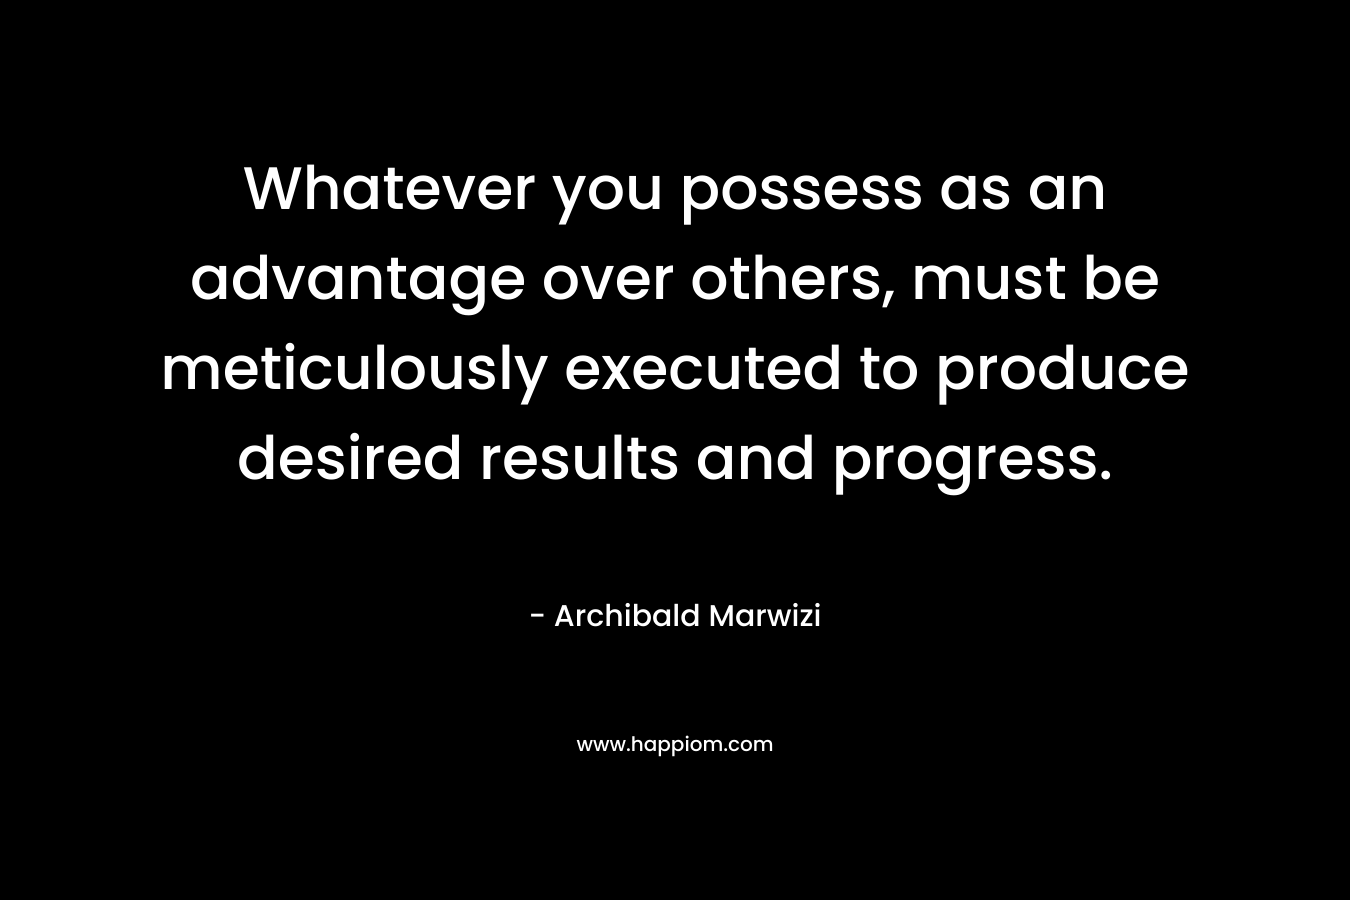 Whatever you possess as an advantage over others, must be meticulously executed to produce desired results and progress.